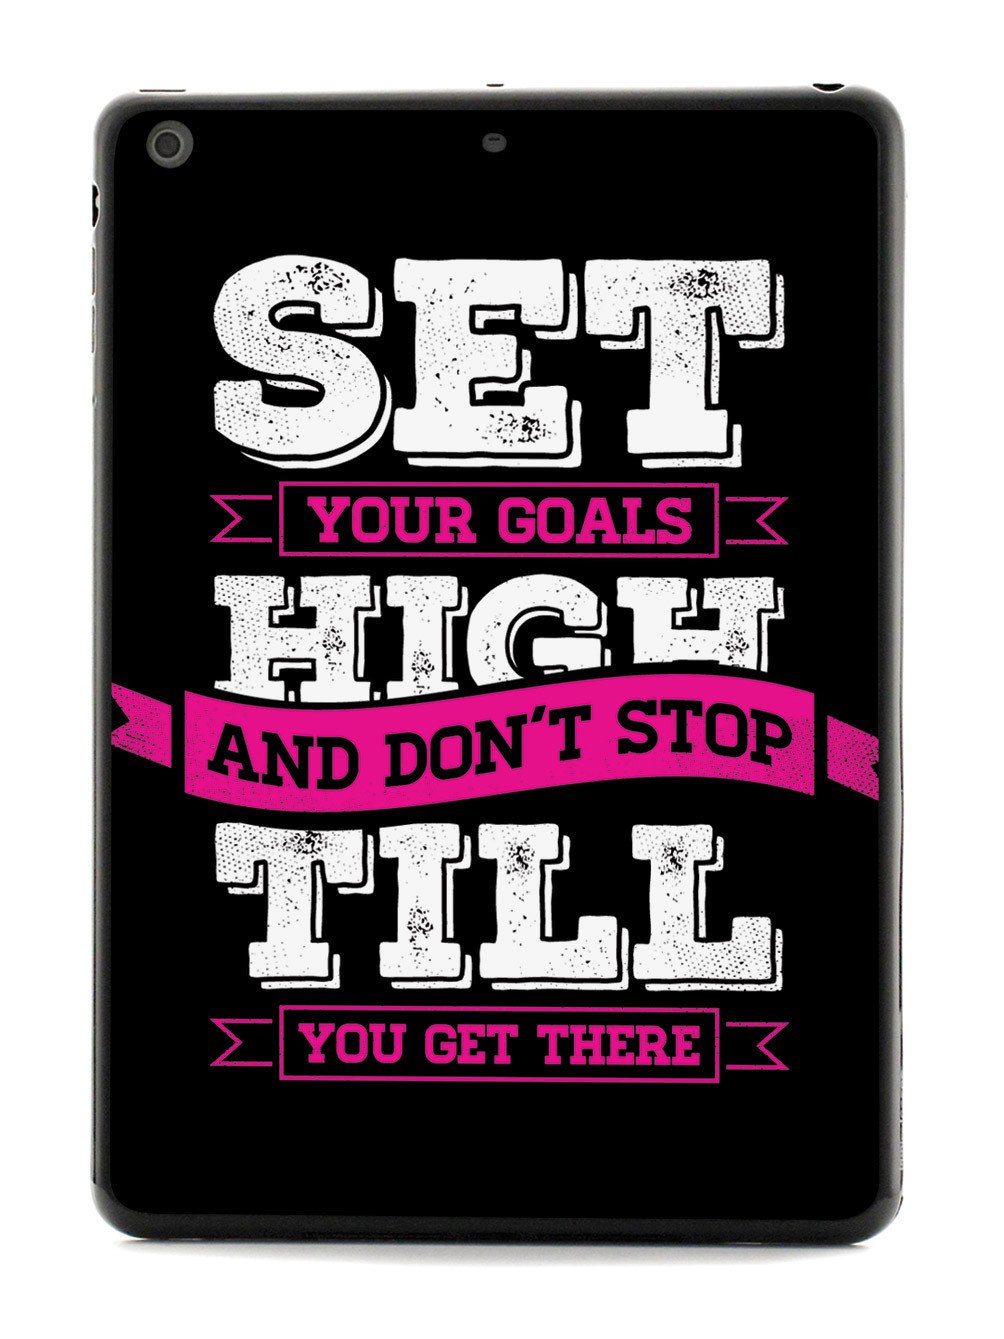 Set Your Goals High, Don't Stop - Black Case - pipercleo.com